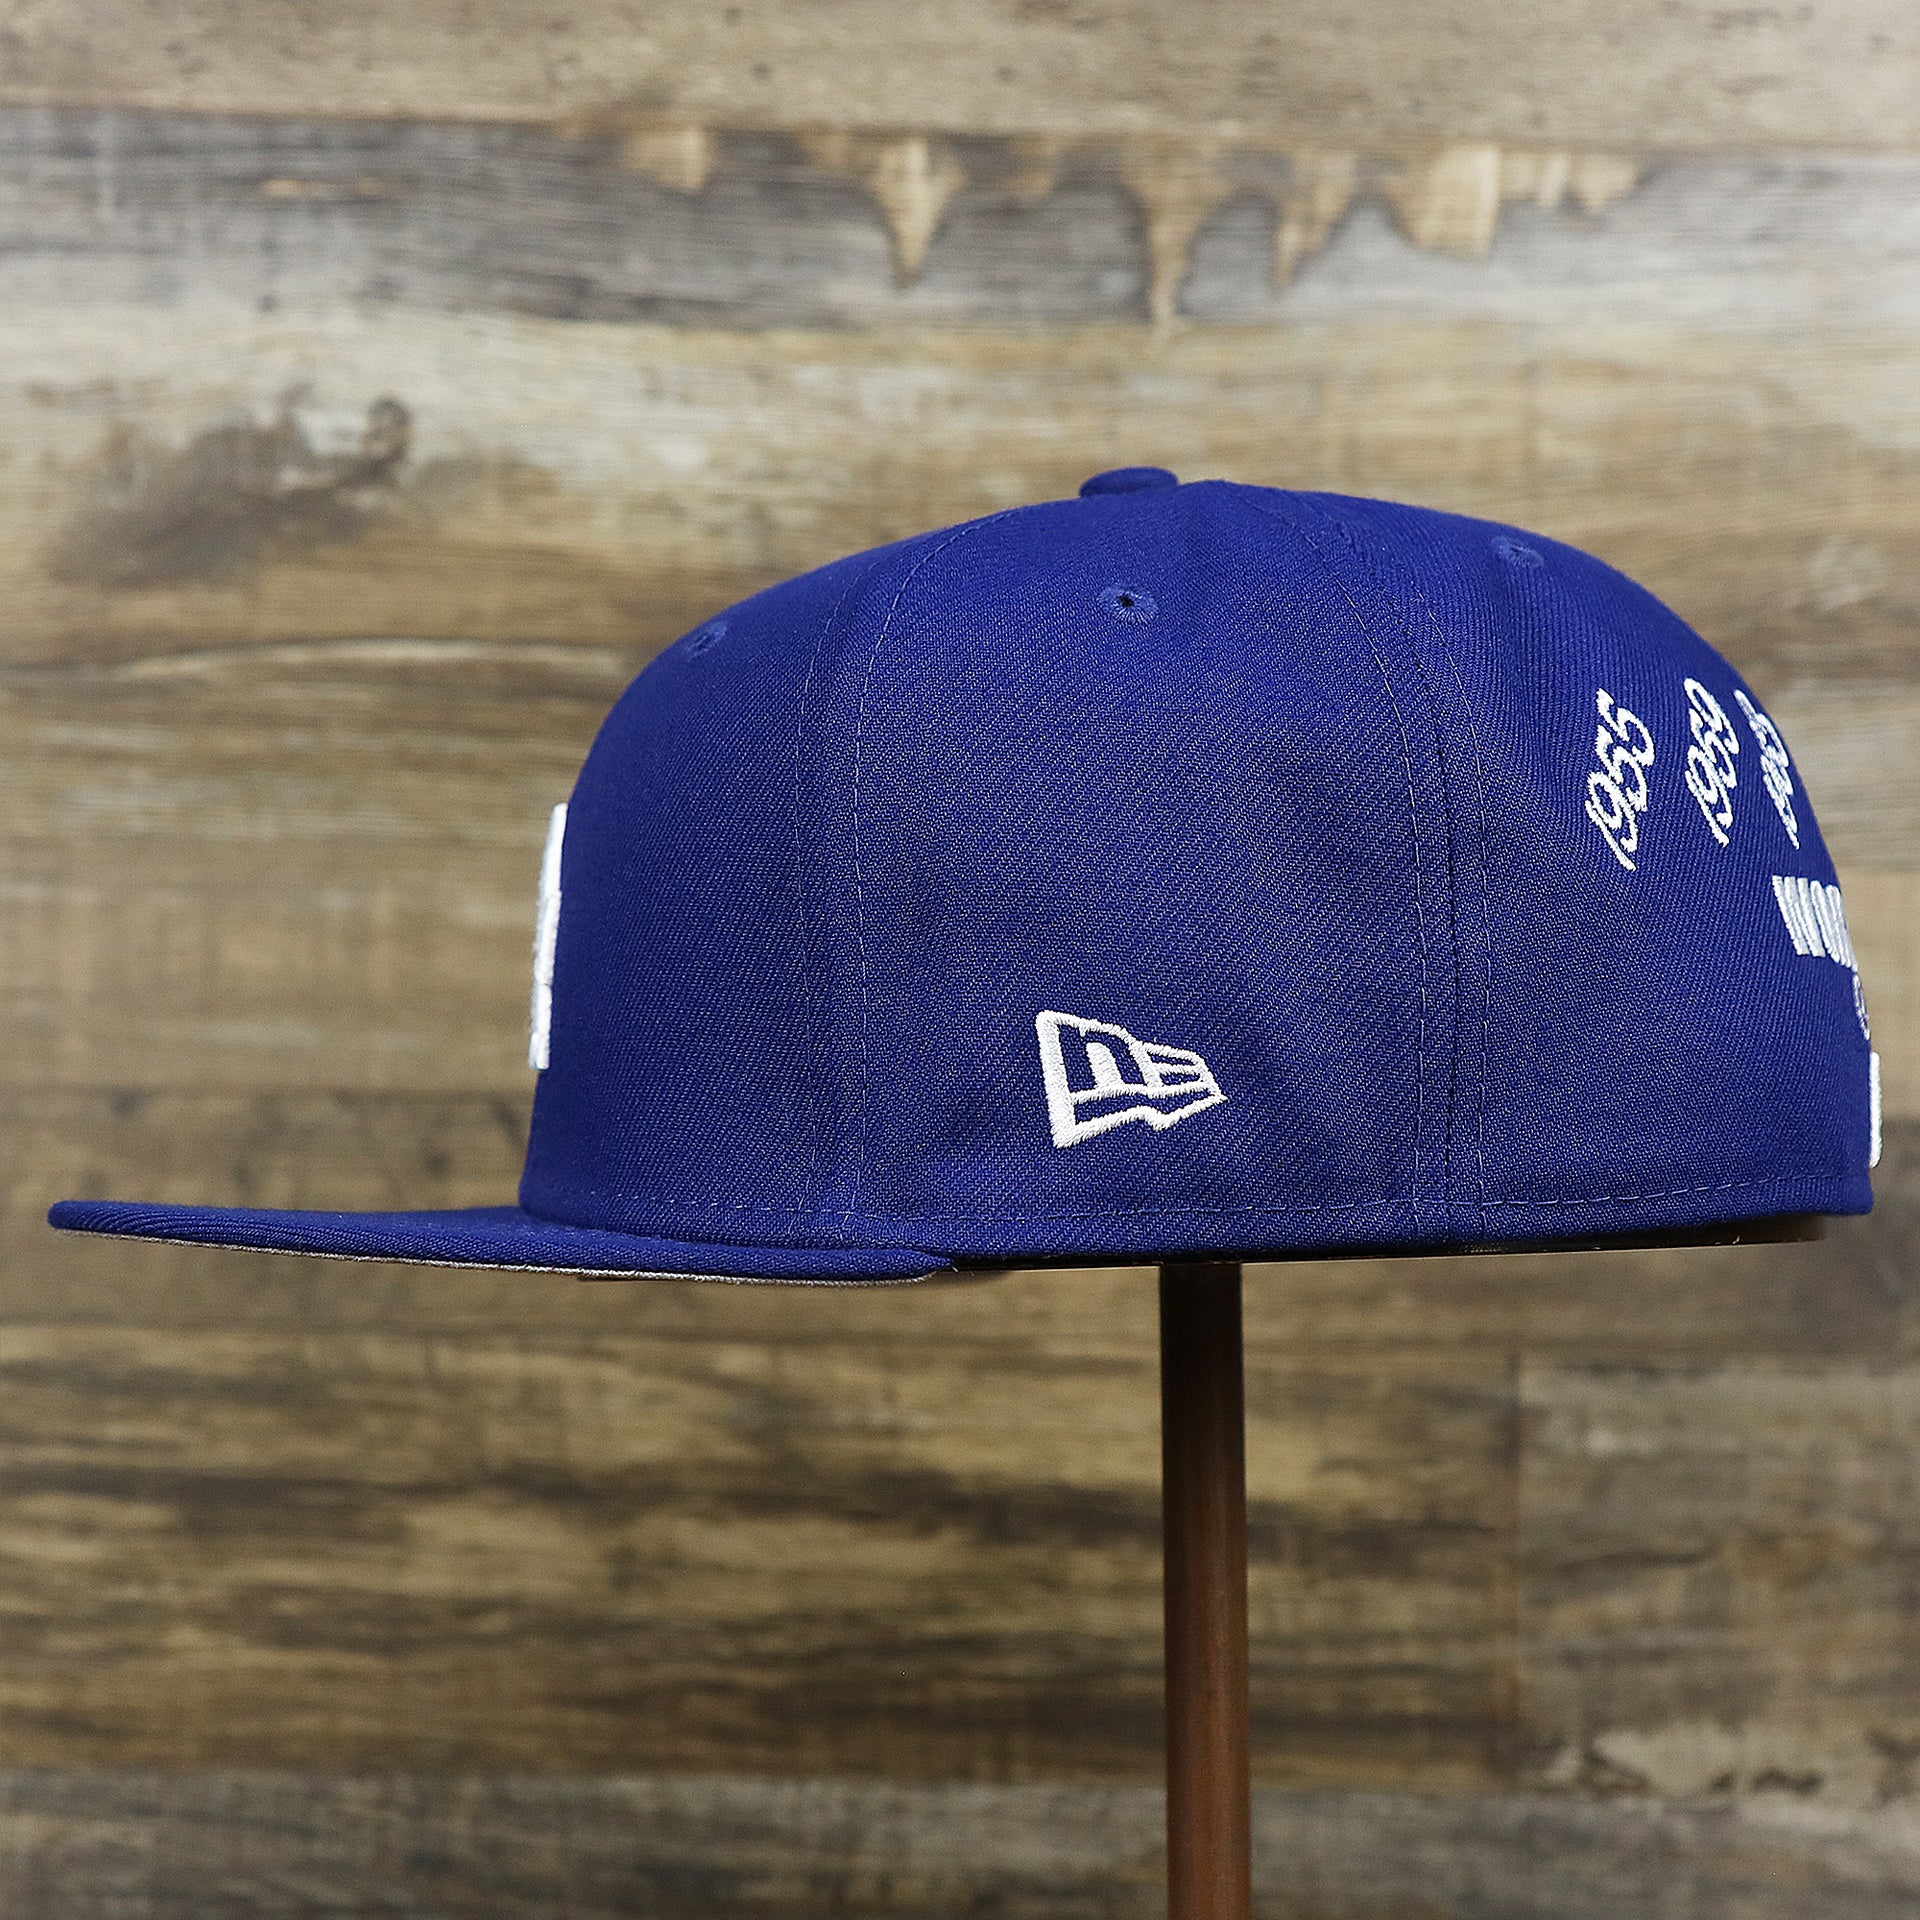 The wearer's left on the Los Angeles Dodgers Crown Champions Gray Bottom World Championship Wins Embroidered Fitted Cap | Royal Blue 59Fifty Cap